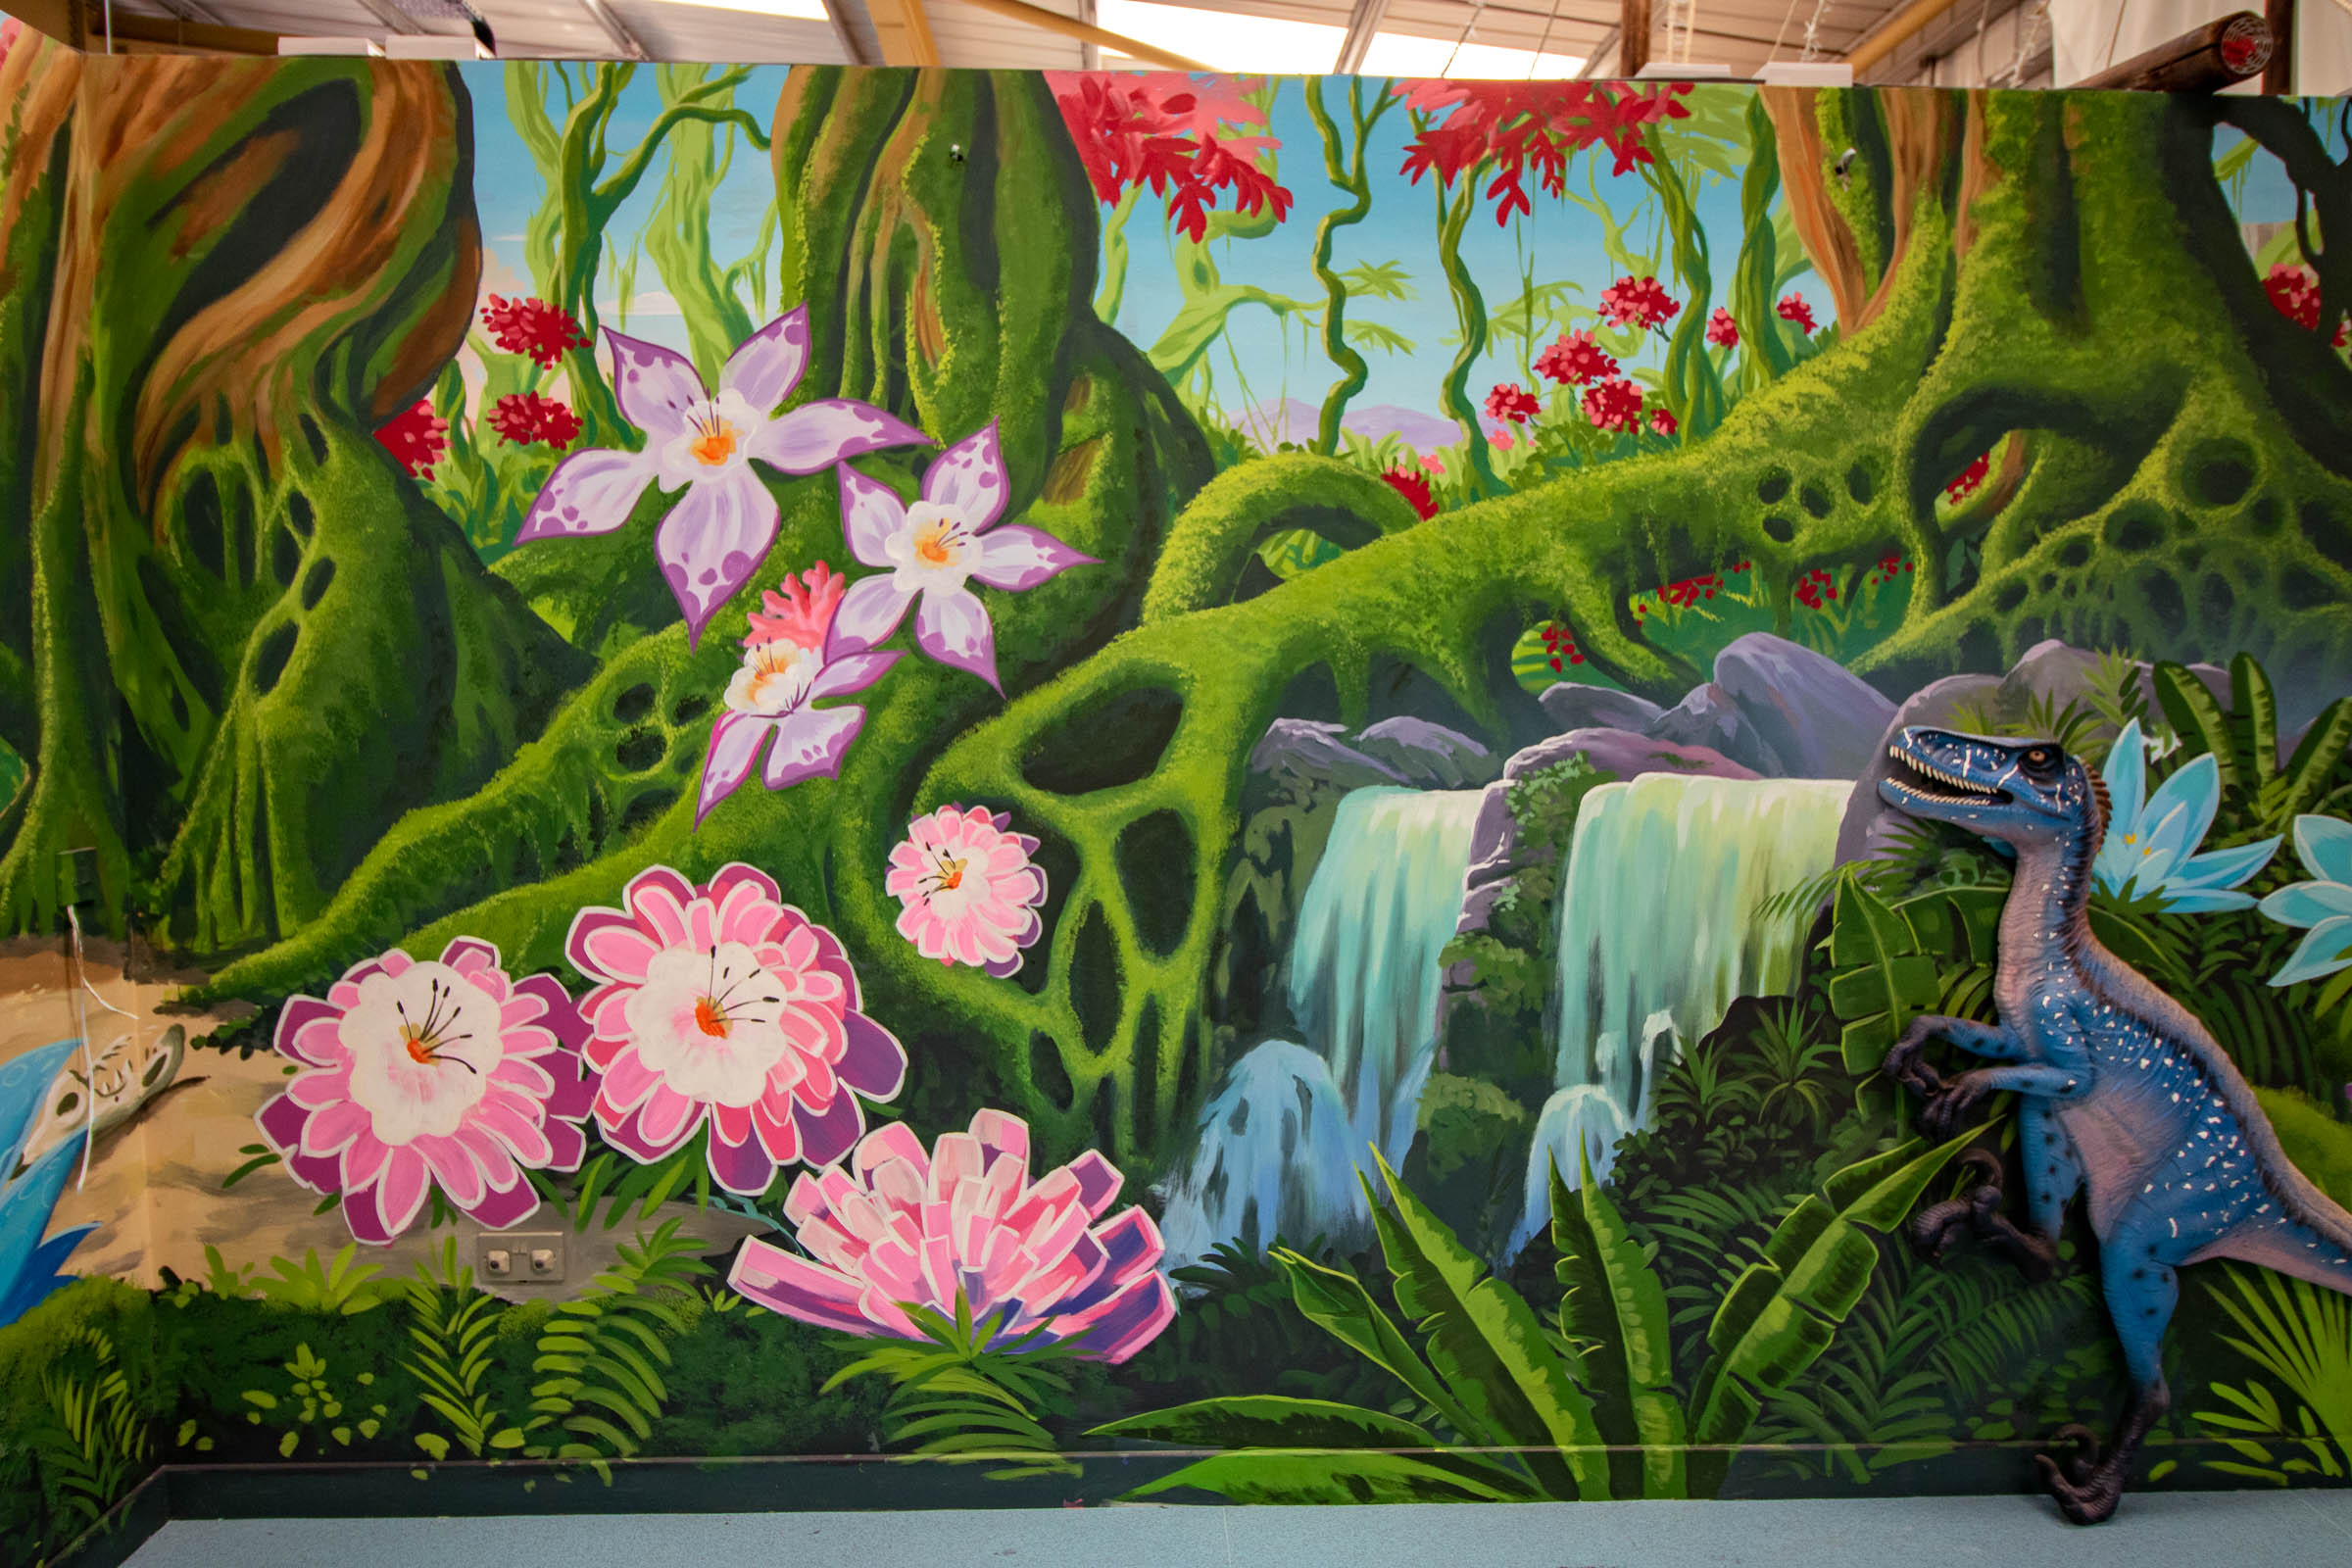 Dinosaur Party Room - Waterfall, huge primordial flowers and mossy tree roots